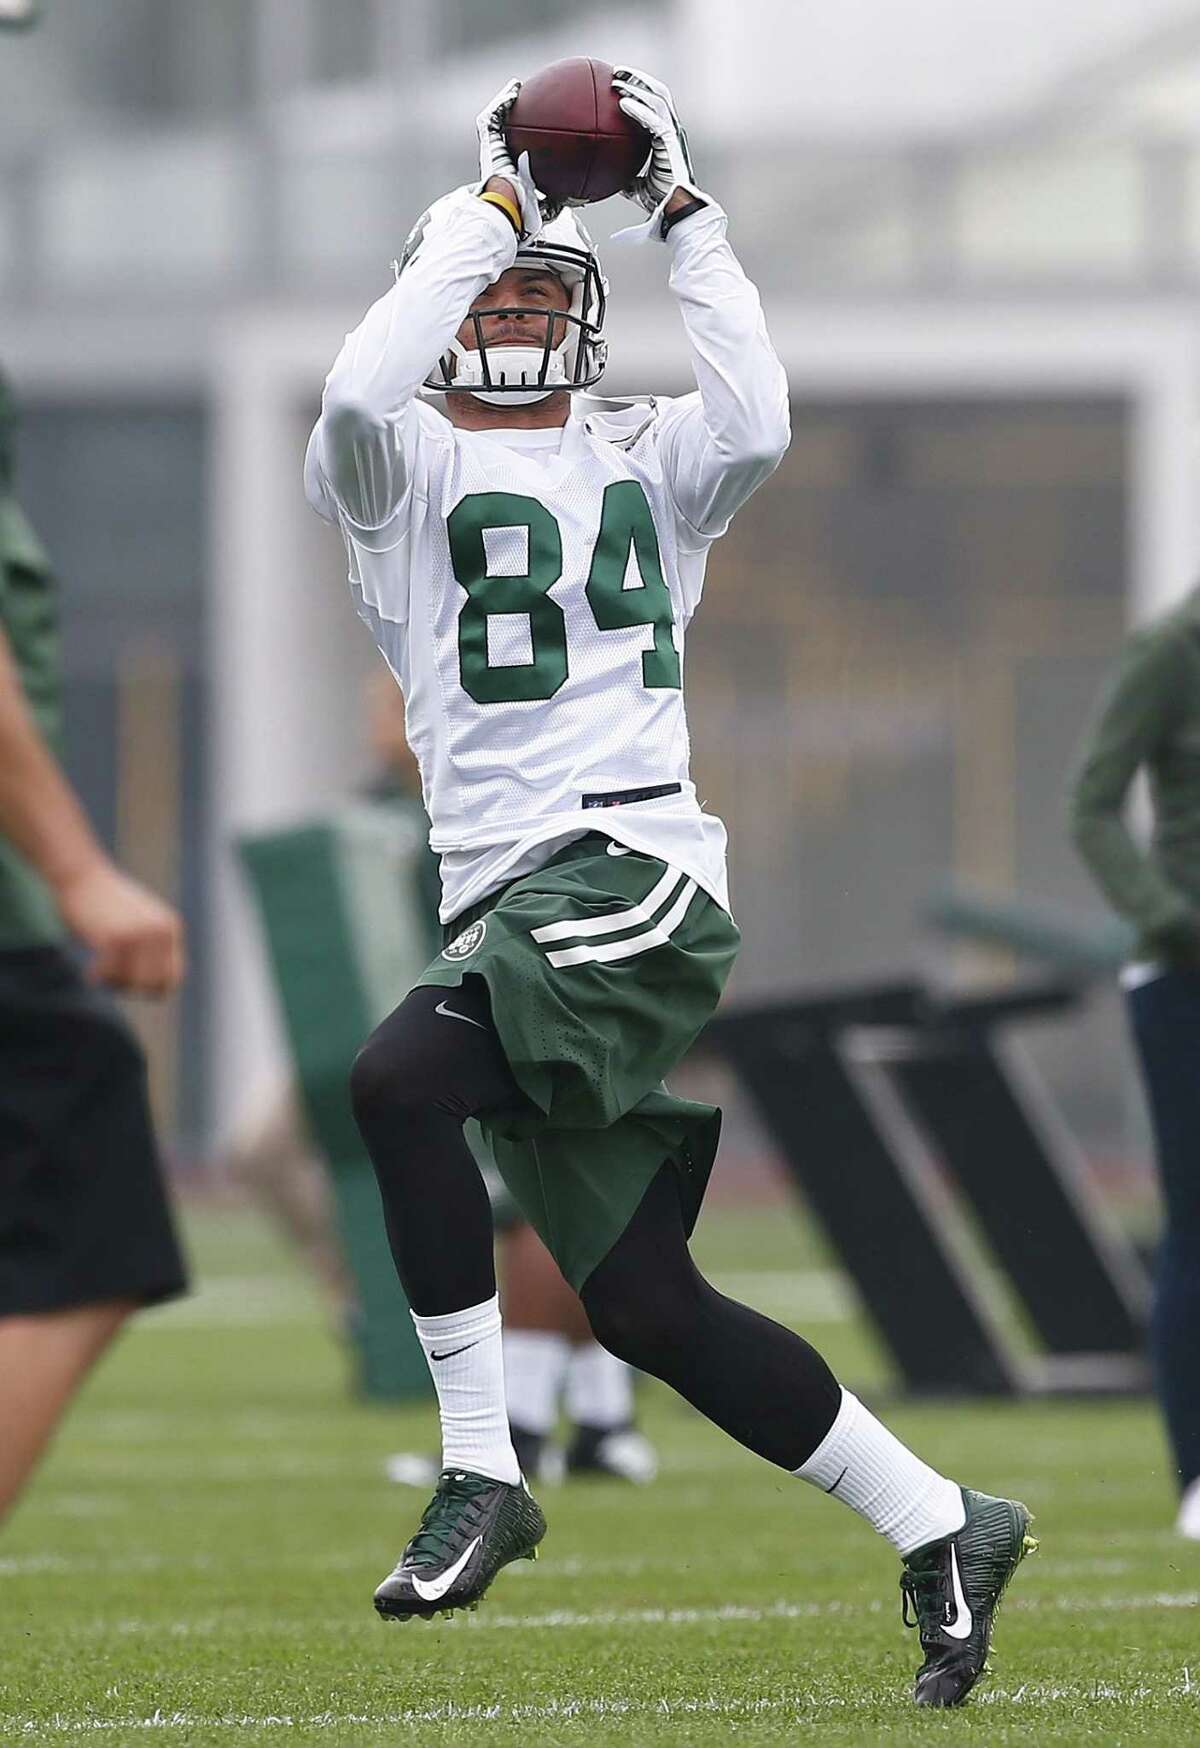 New York Jets rookie receiver Devin Smith makes a catch during Saturday’s practice in Florham Park, N.J.